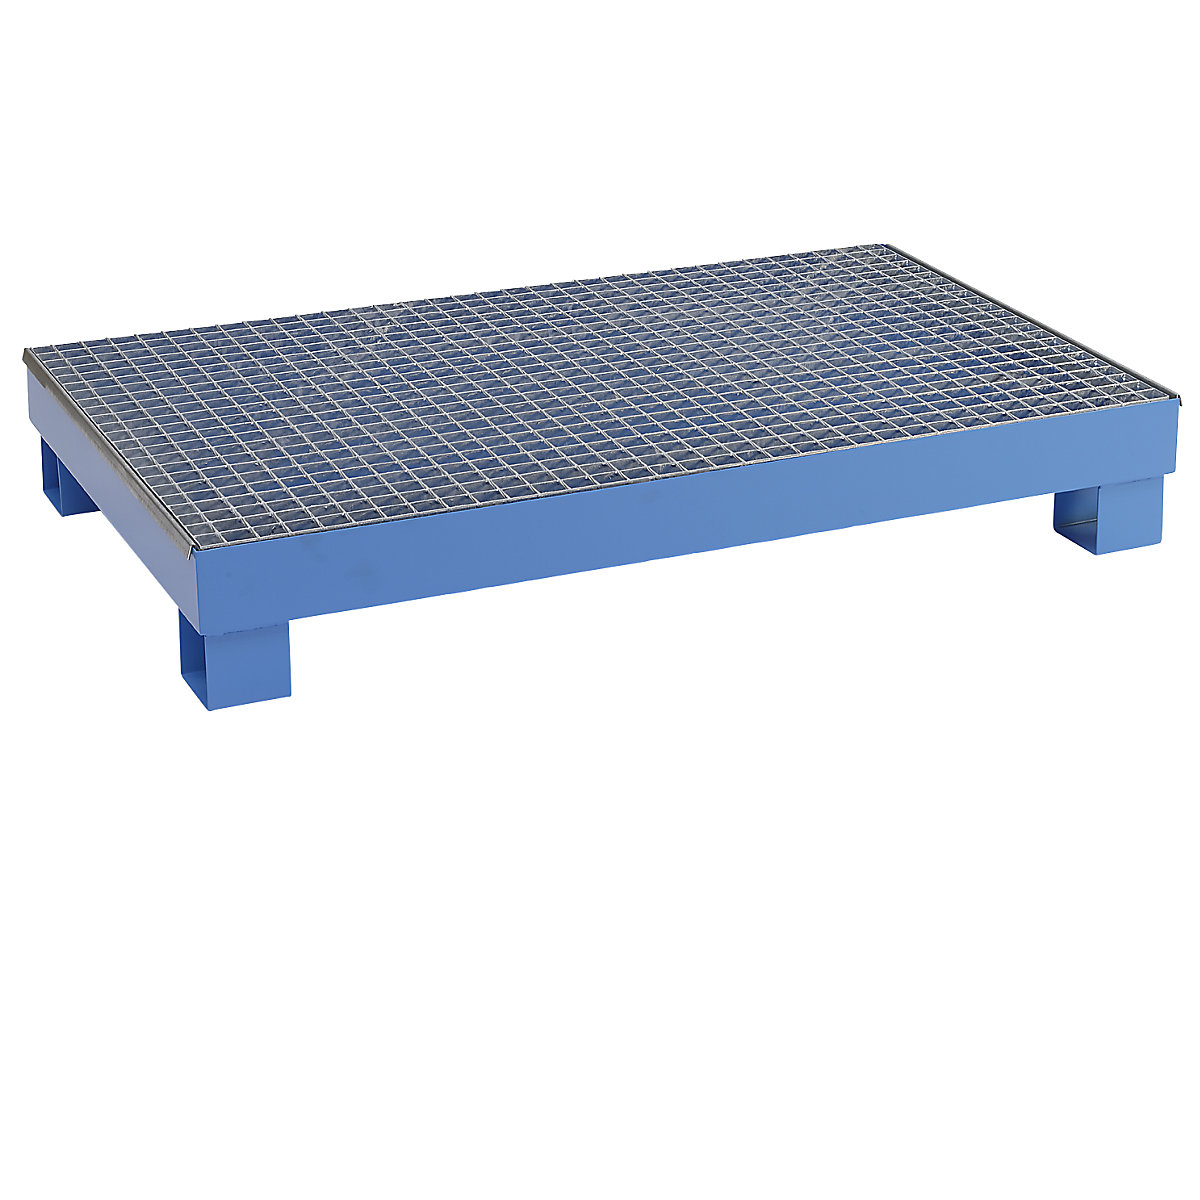 Sump tray for 60 l – eurokraft basic, LxWxH 800 x 1300 x 205 mm, without certification, powder coated blue, with grate-3